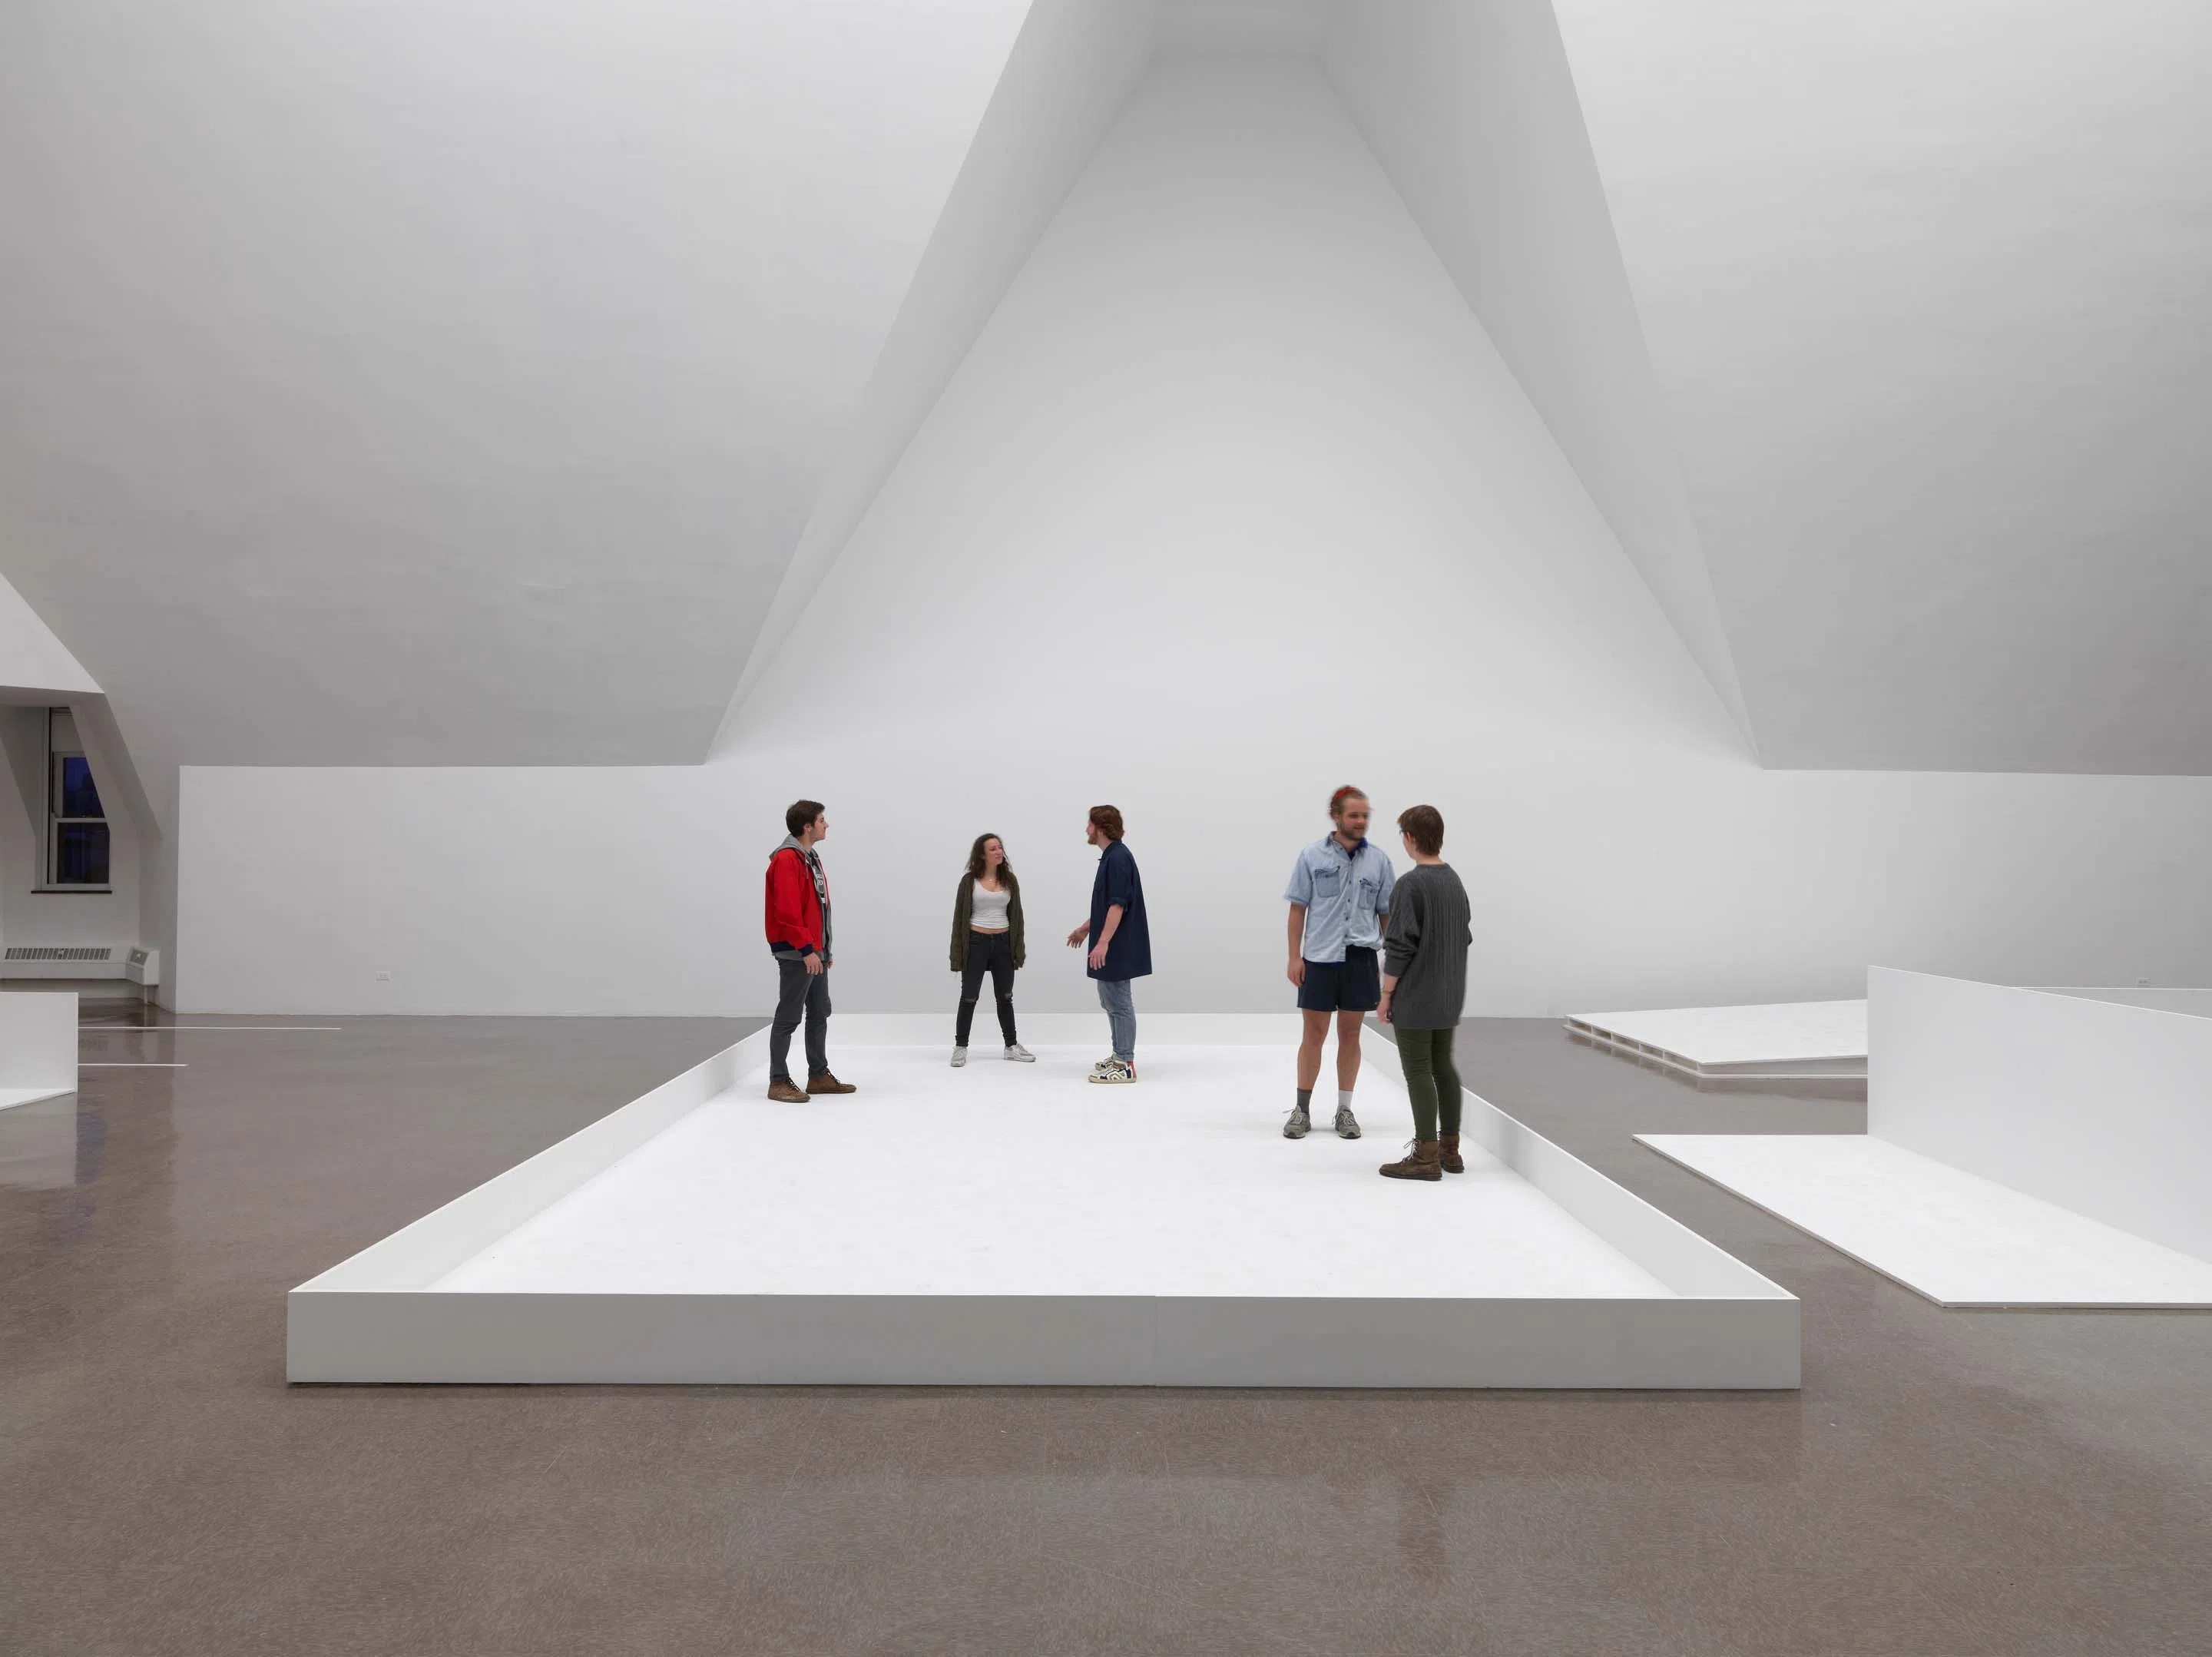 5 students stand on a white platform in an empty white art museum space with cathedral ceilings